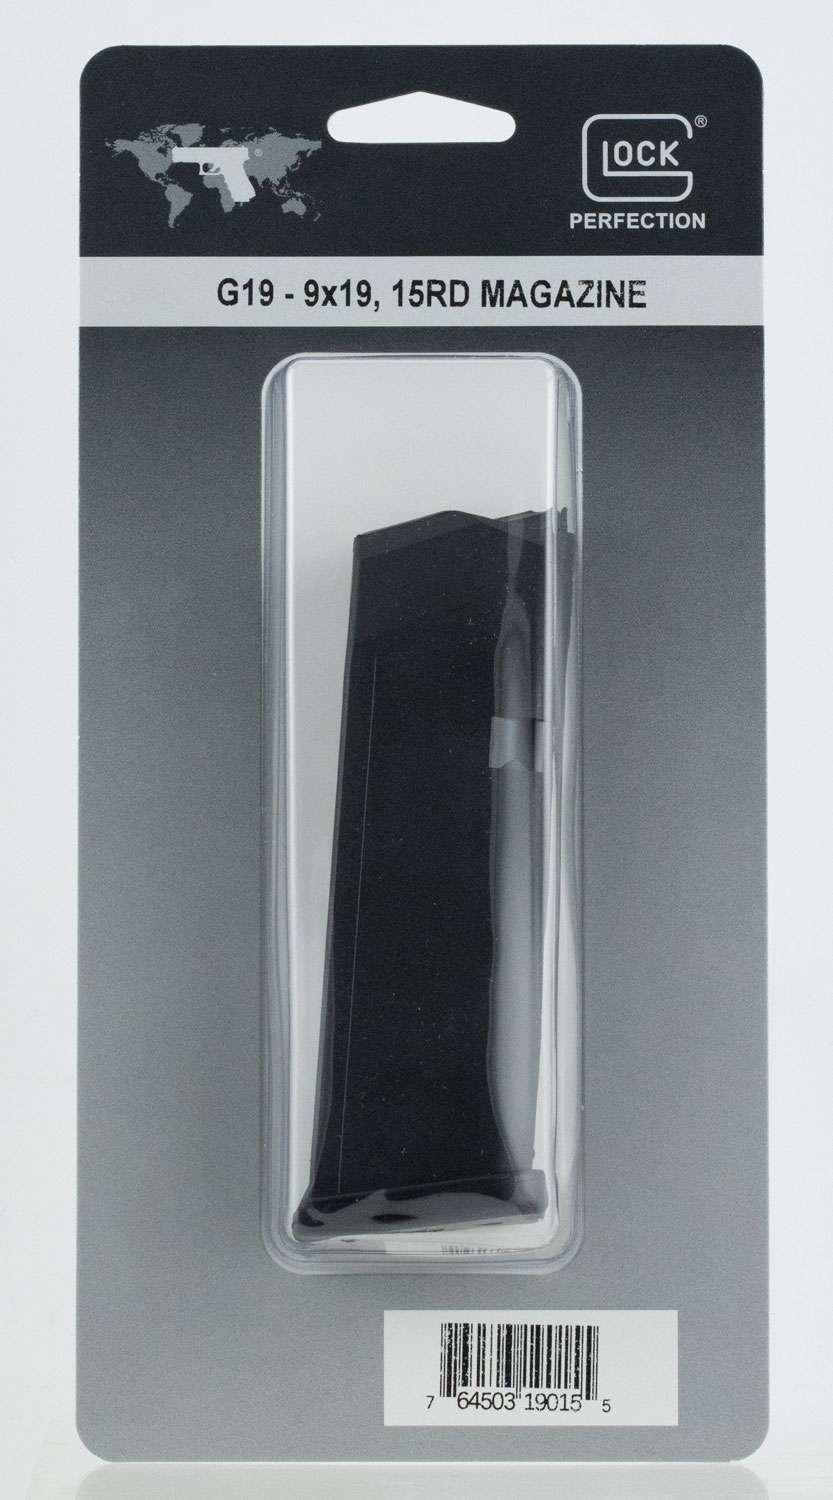 3x Glock 19 compatible 9x19 15rd Magazines - $54.99 with Free Shipping! 